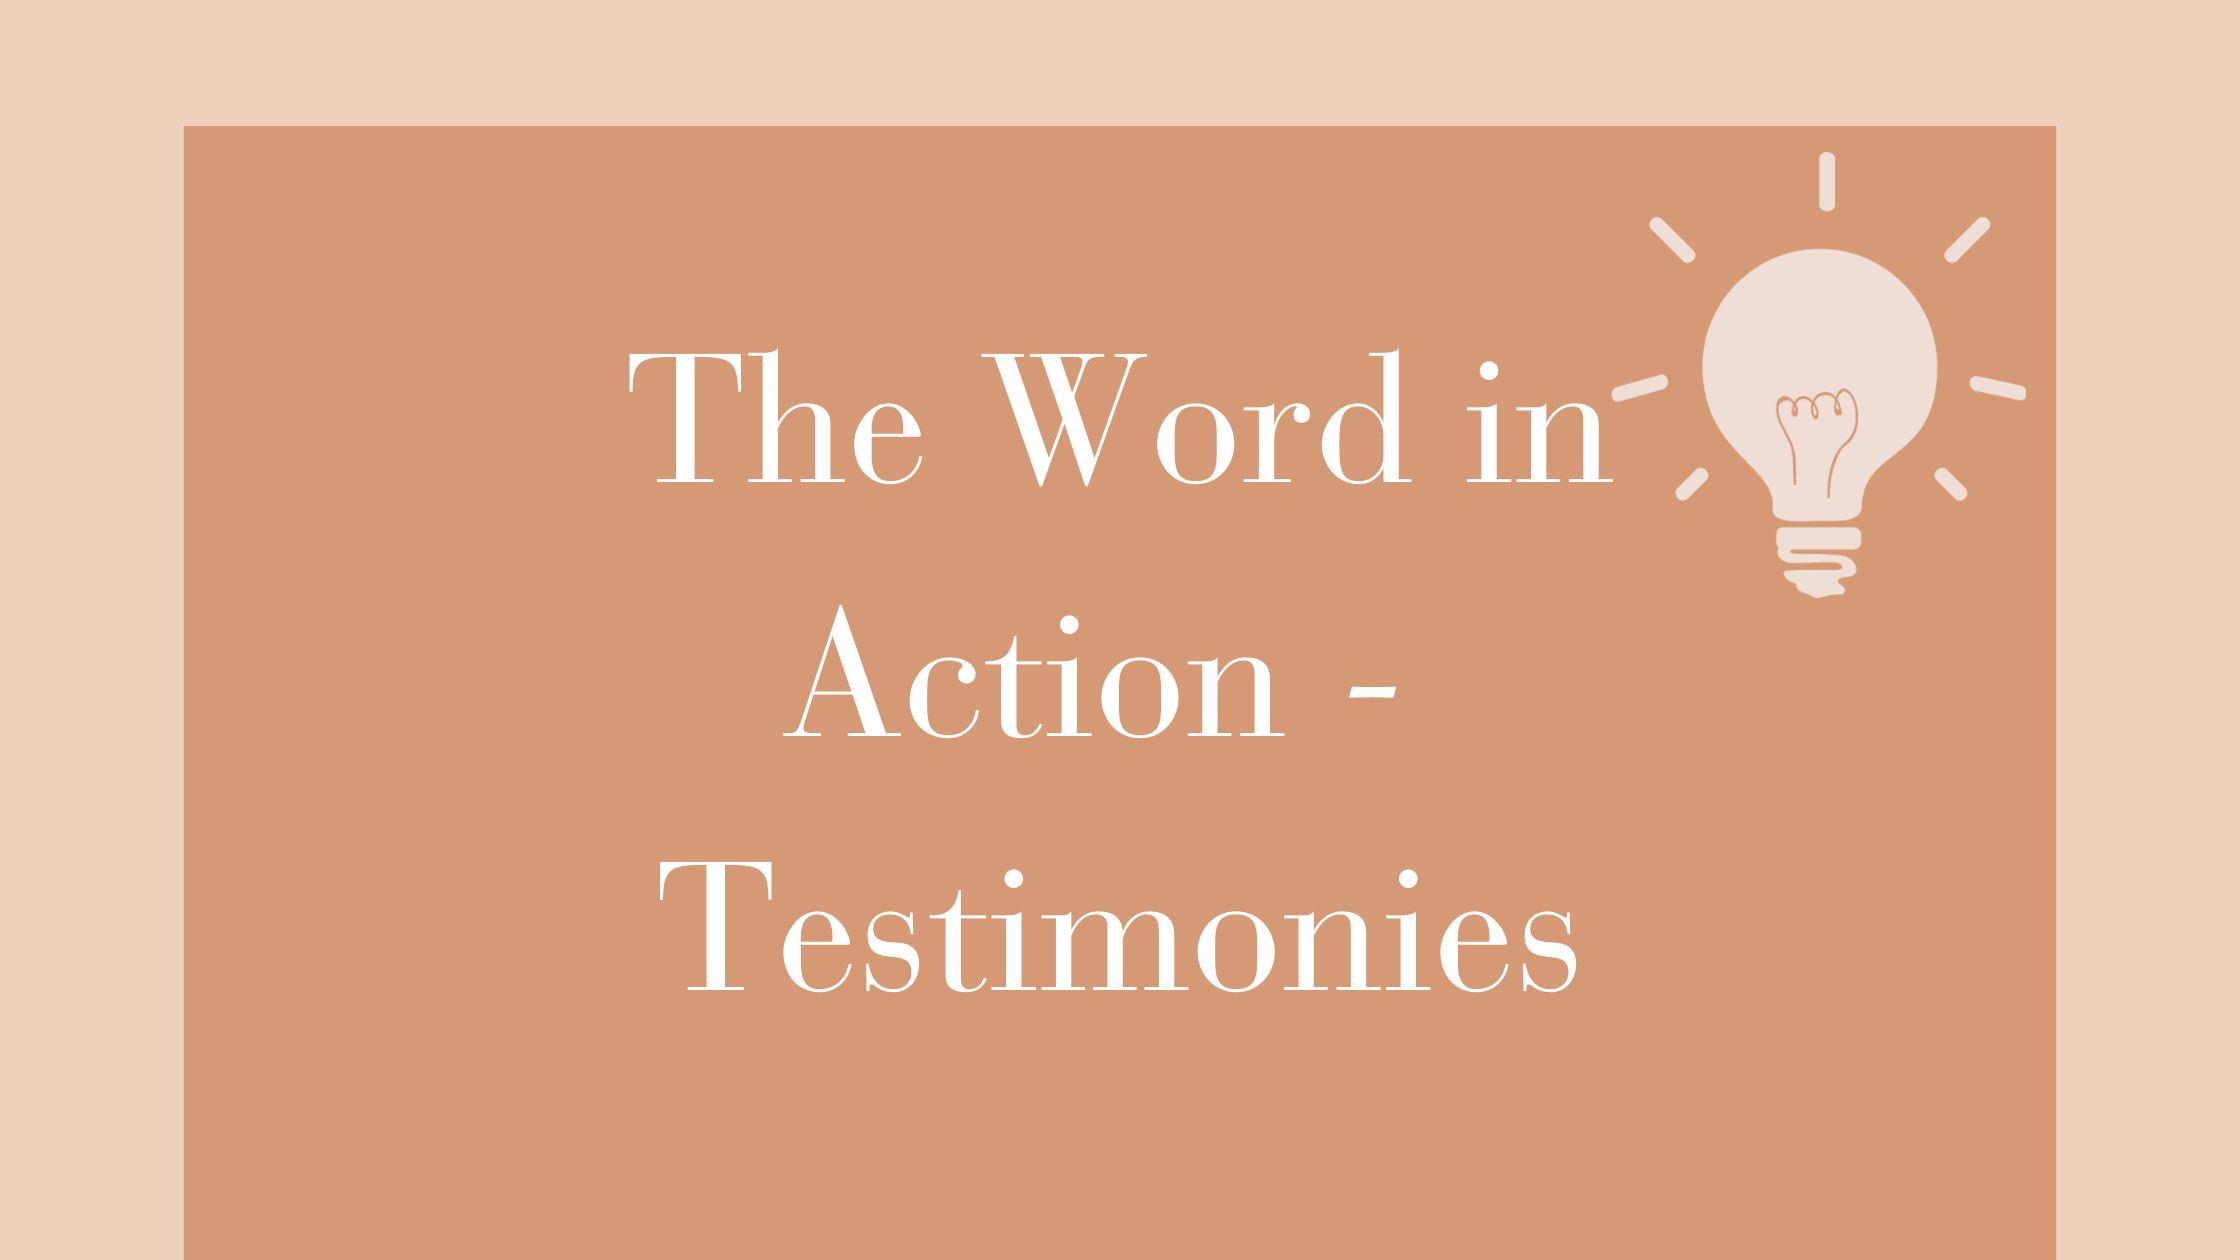 The Word in Action testimonies